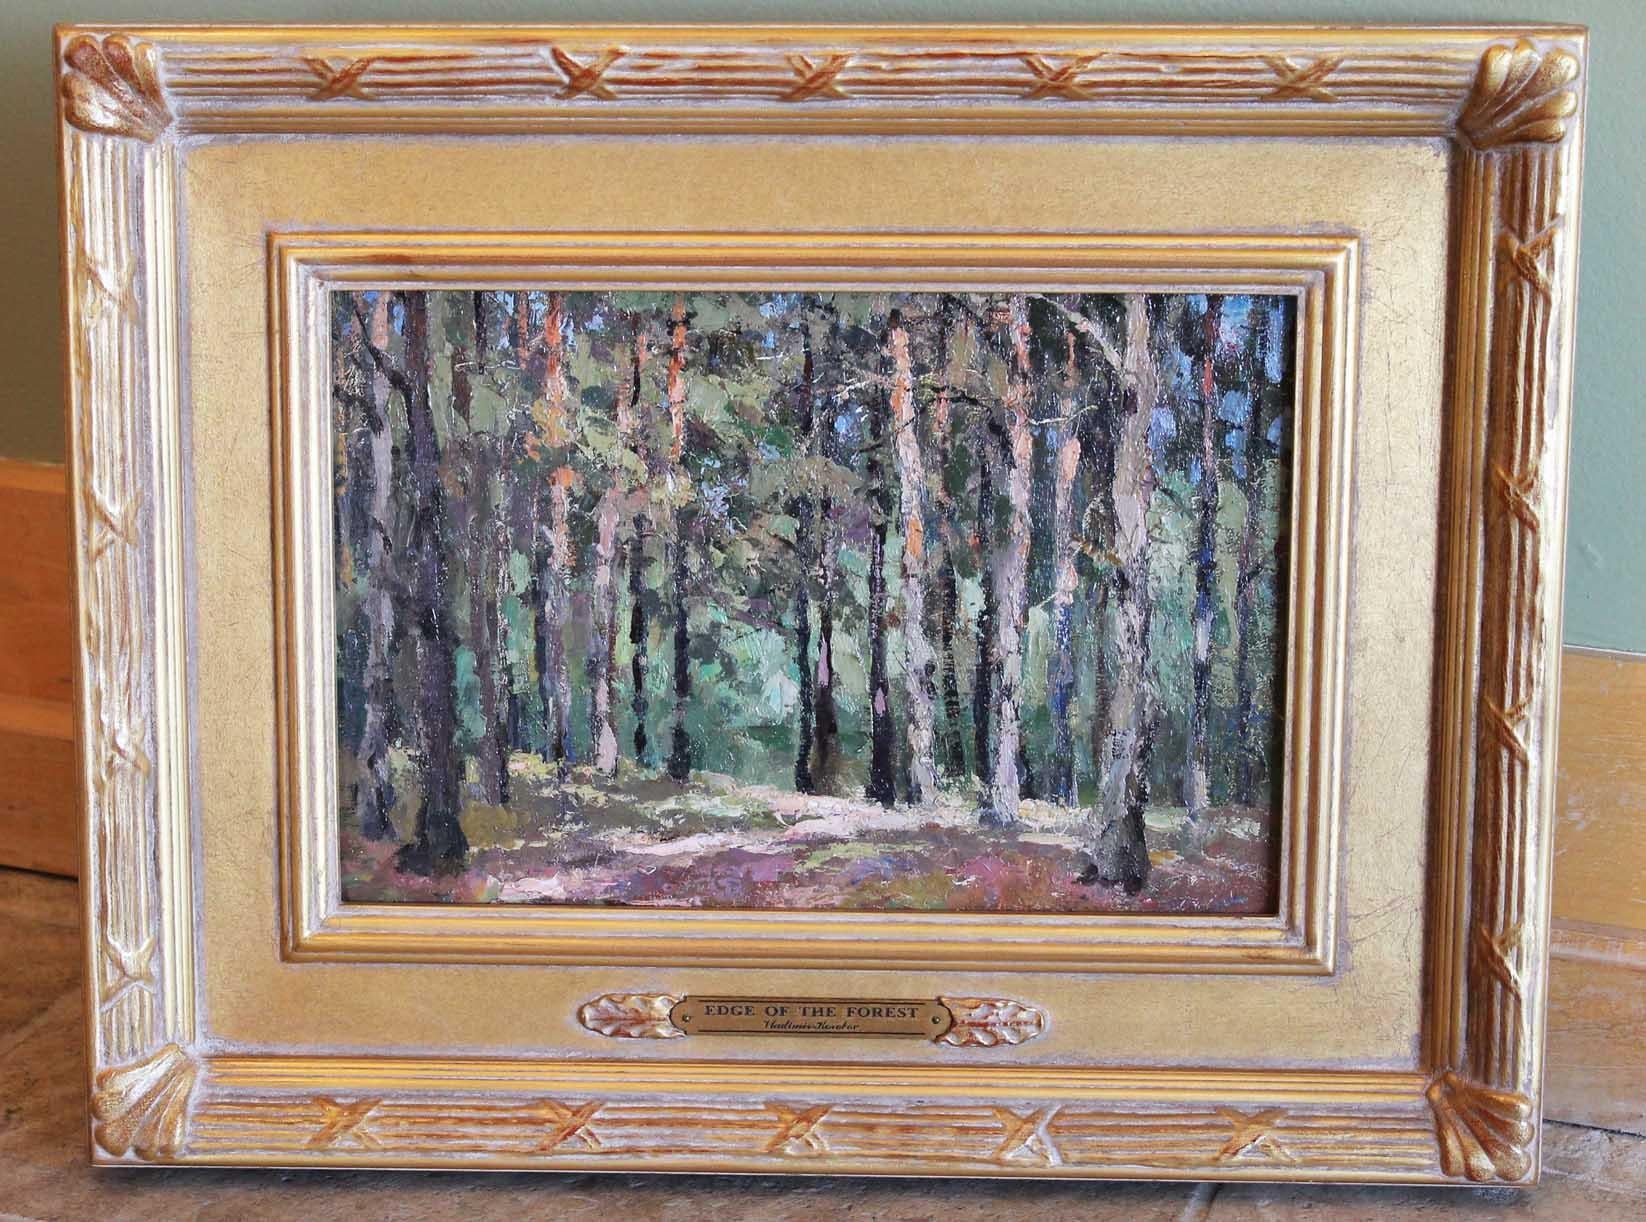 Edge of the Forest - Painting by Vladimir Korobov